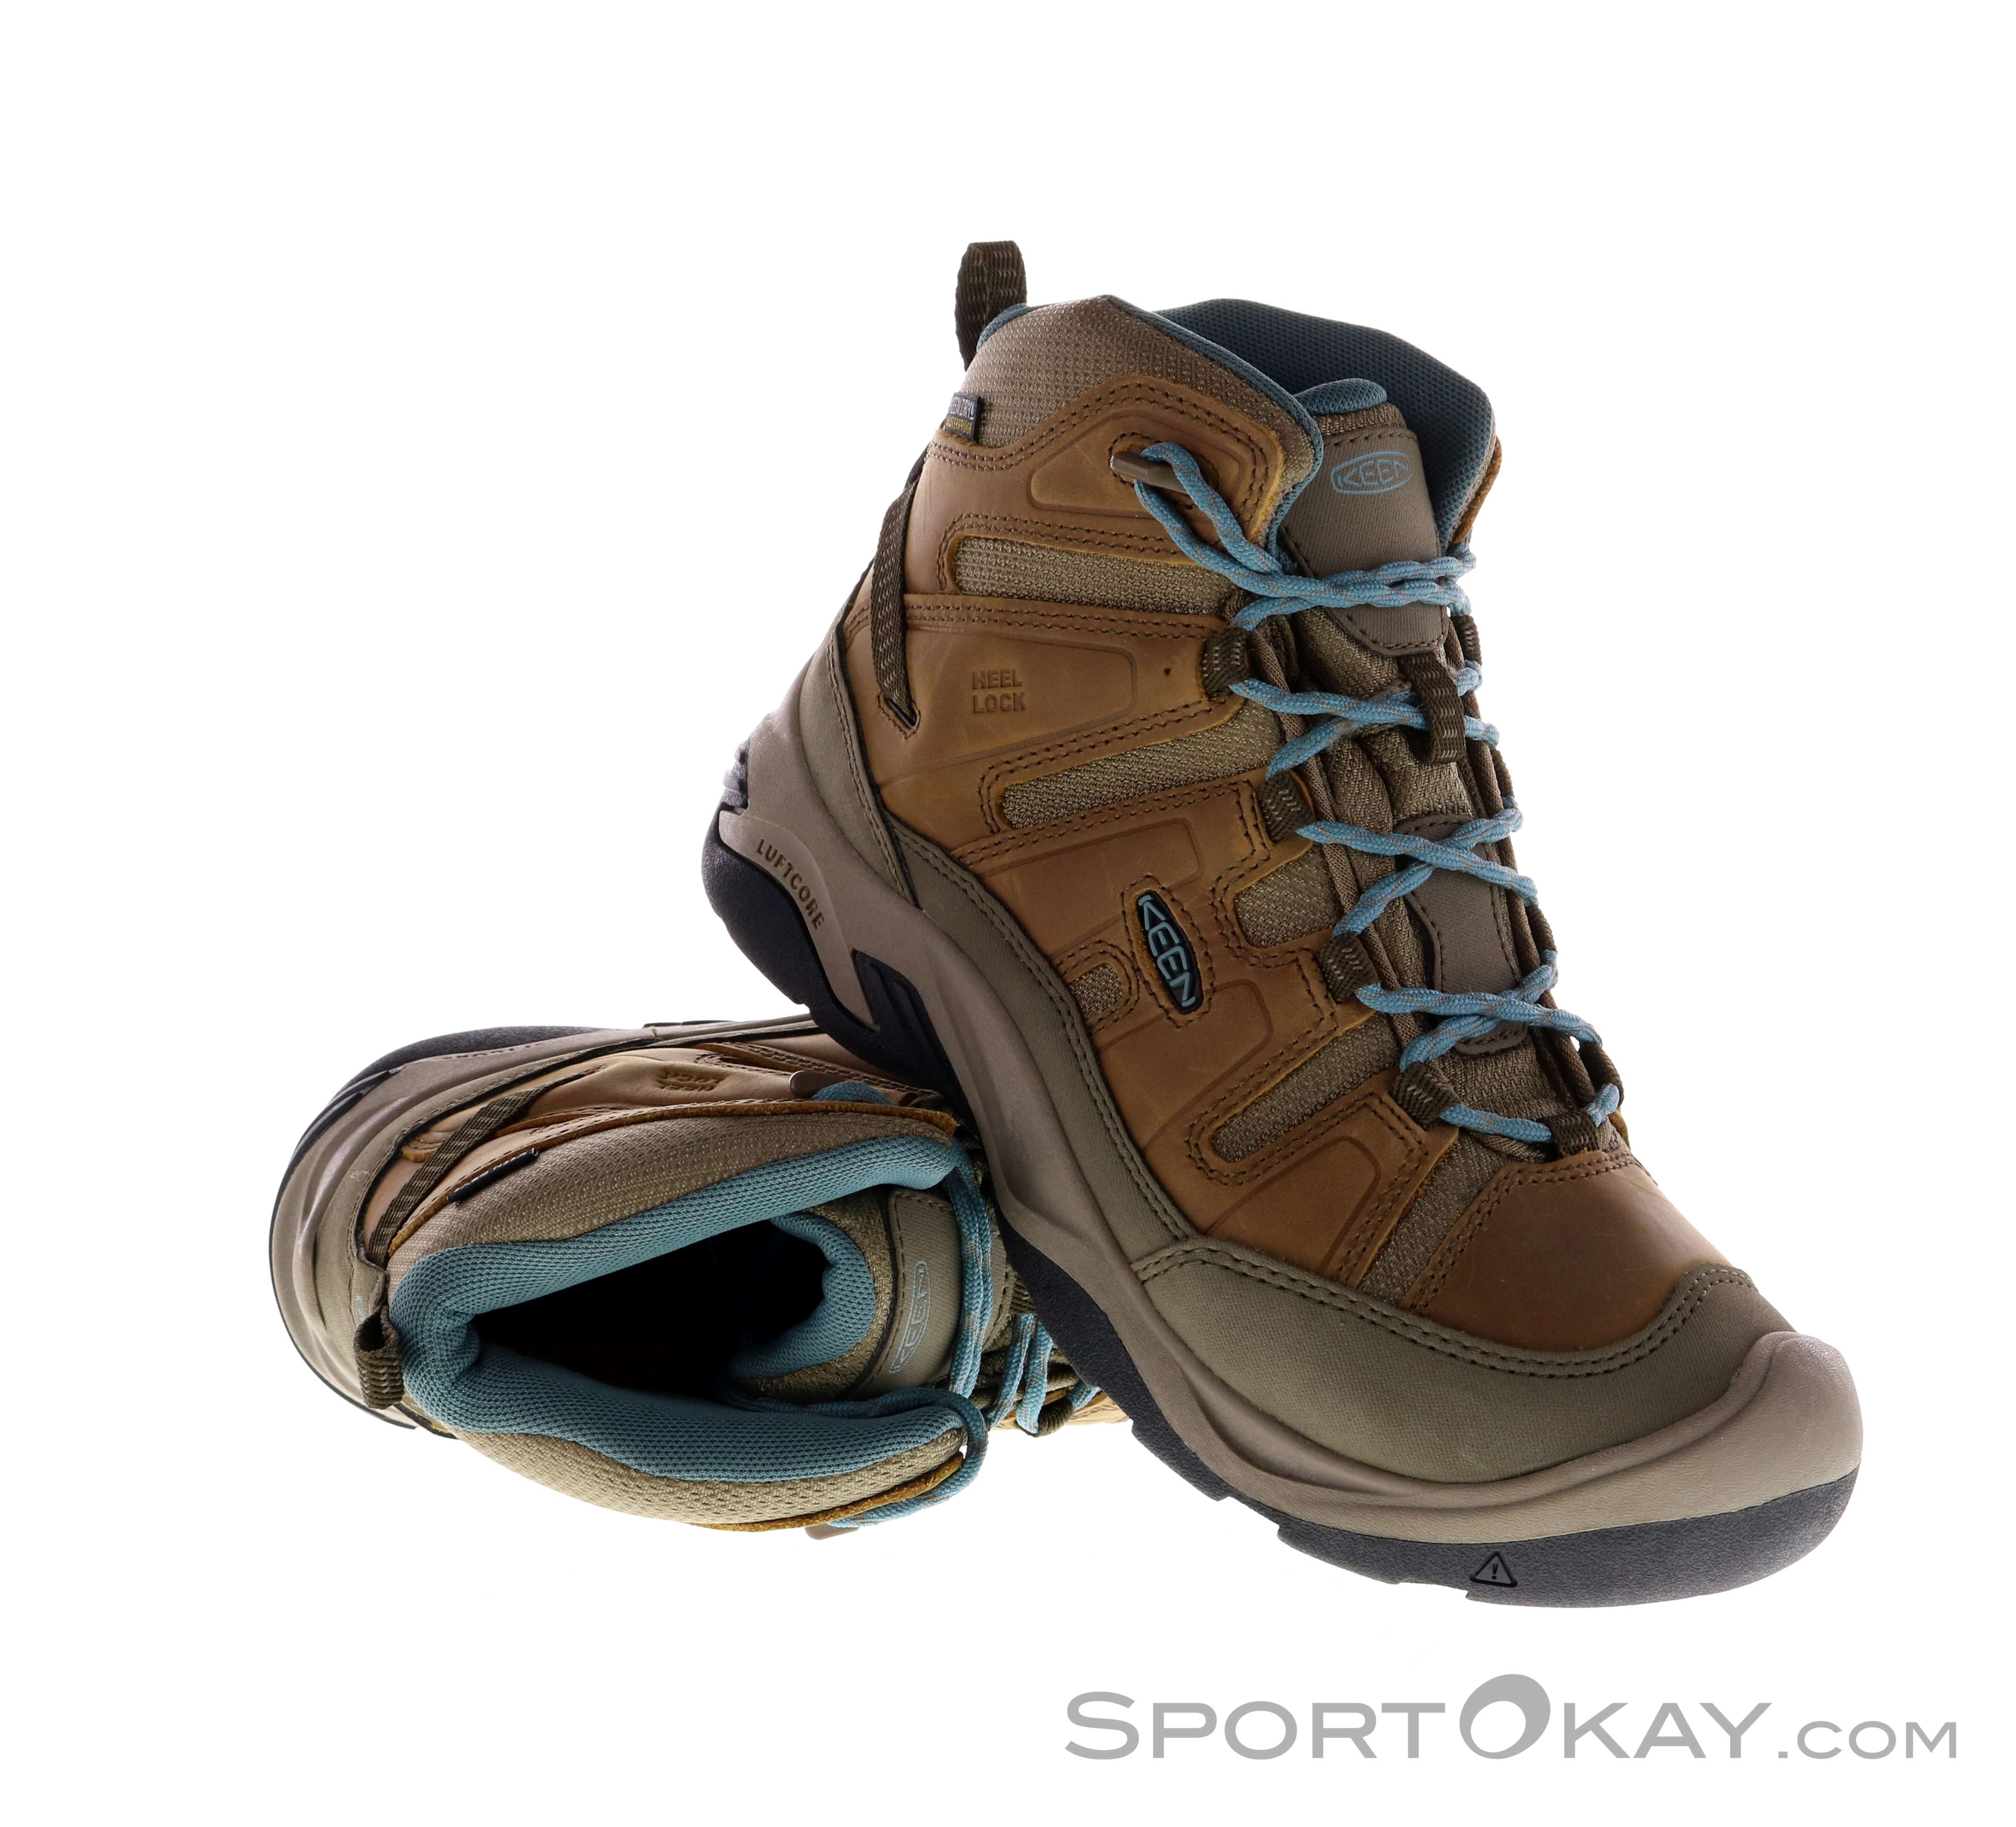 Keen Circadia Mid WP Women Hiking Boots - Trekking Shoes - Shoes & Poles -  Outdoor - All